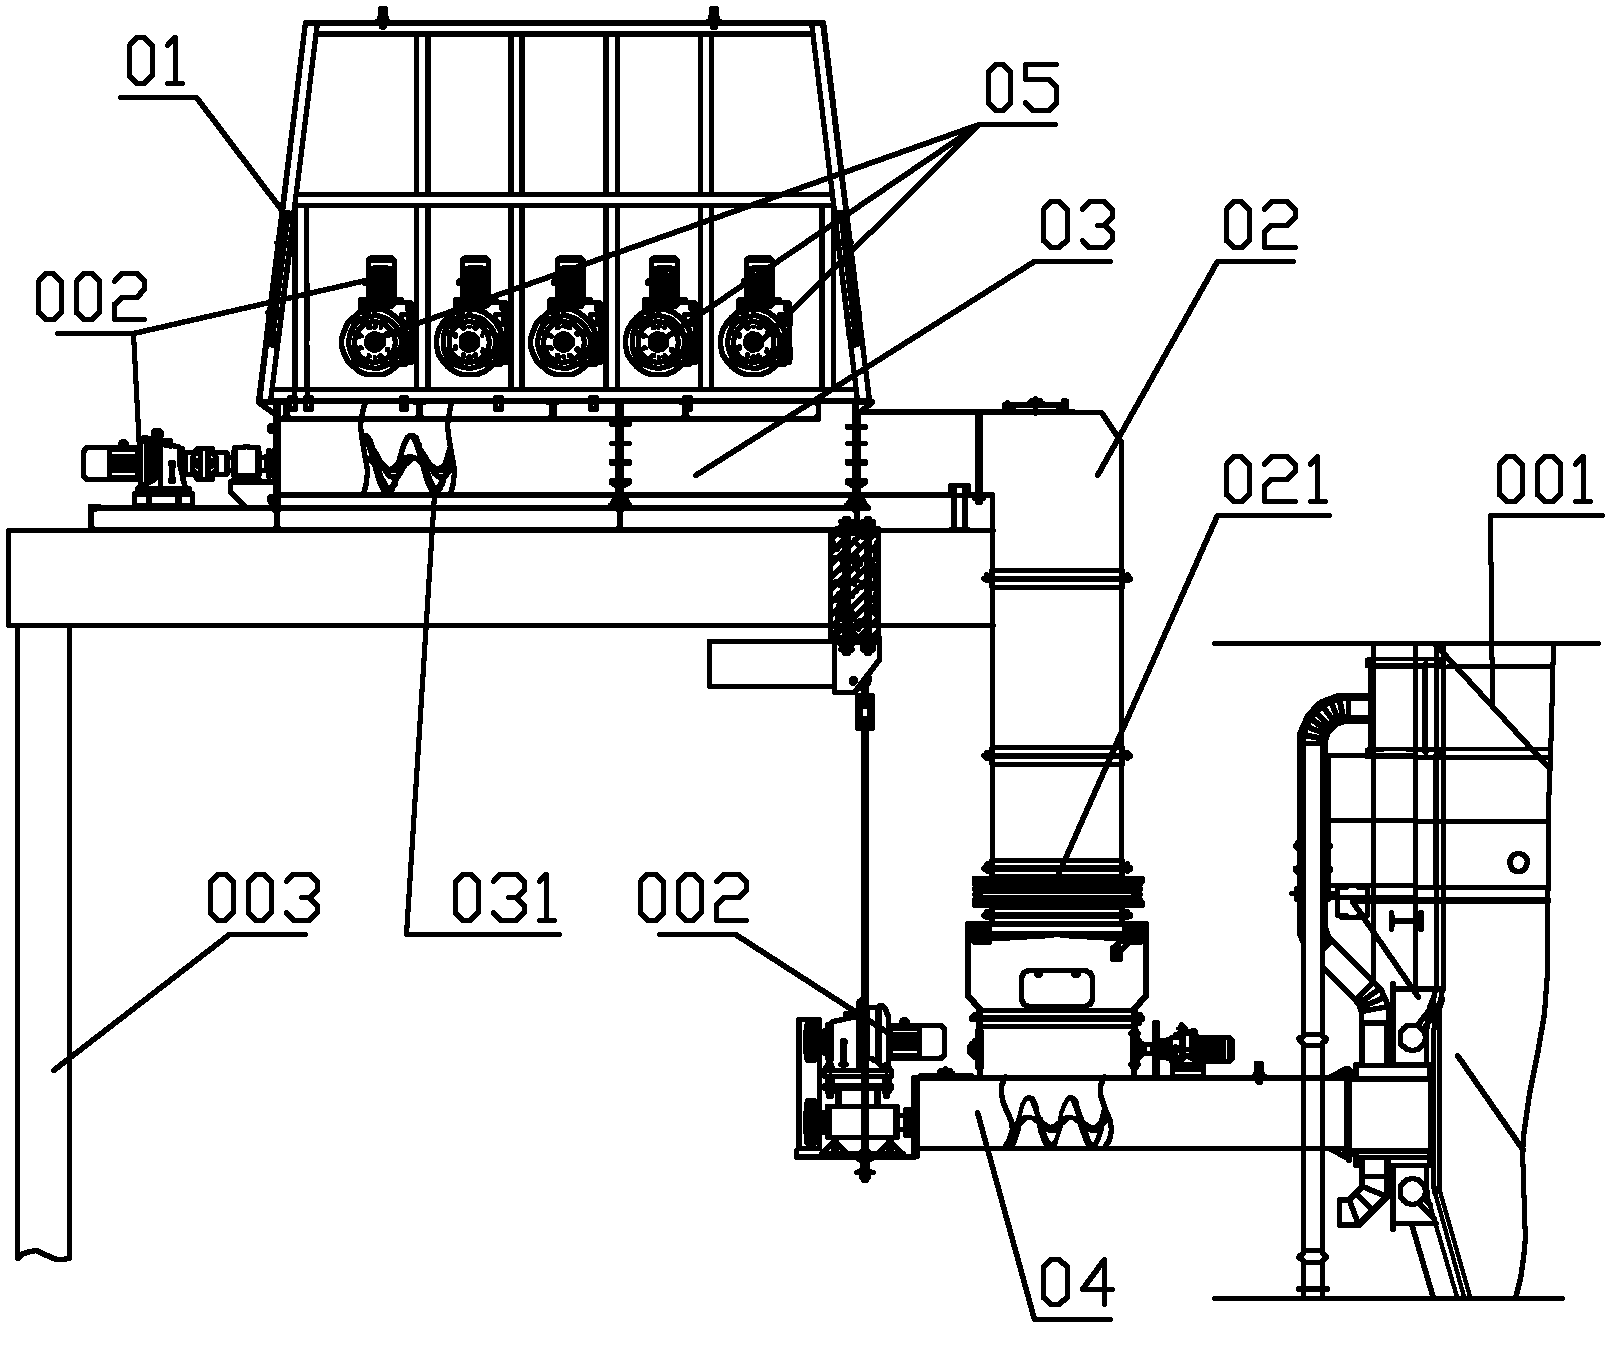 Front feeding system of biomass power plant furnace